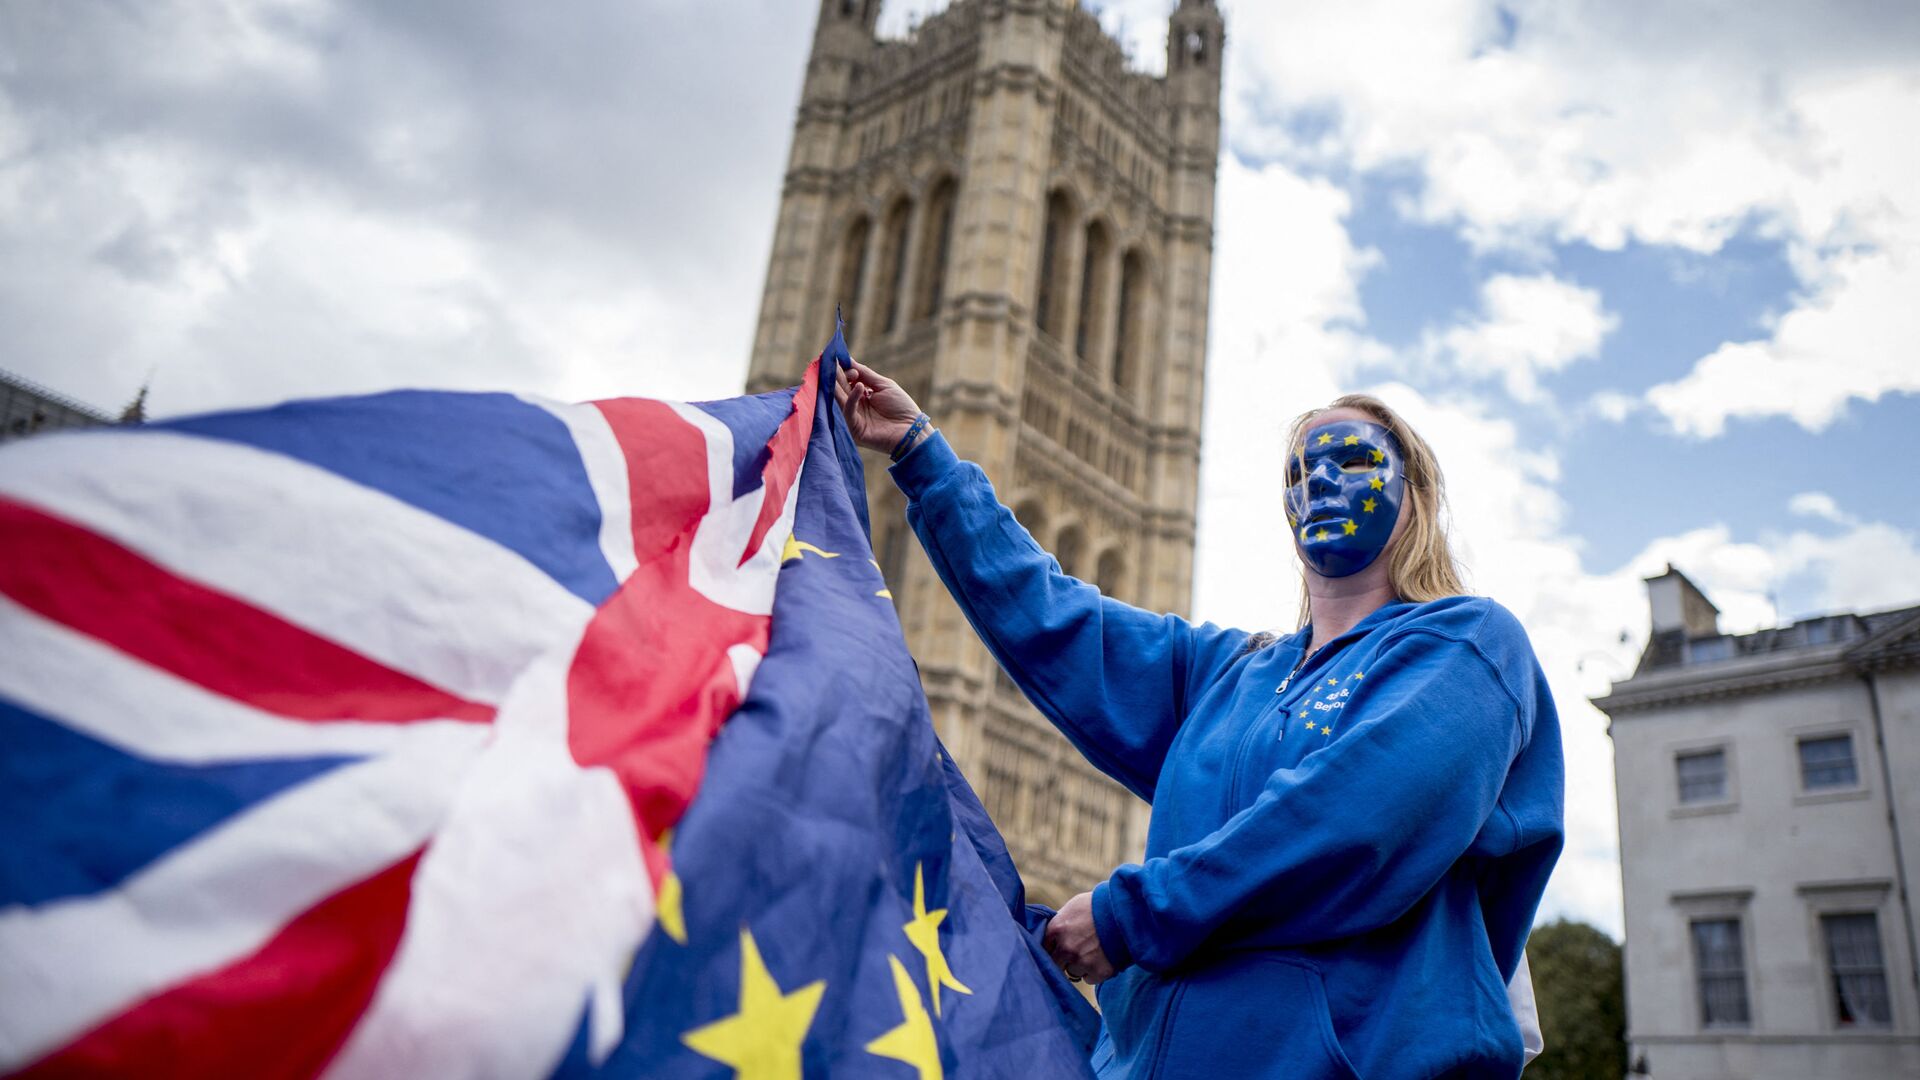 A Pro-European Union protester holds Union and European flags in front of the Victoria Tower at The Palace of Westminster in central London on September 13, 2017, ahead of a rally to warn about the terms of Brexit, by EU nationals in Britain and UK nationals in Europe - Sputnik International, 1920, 28.01.2022